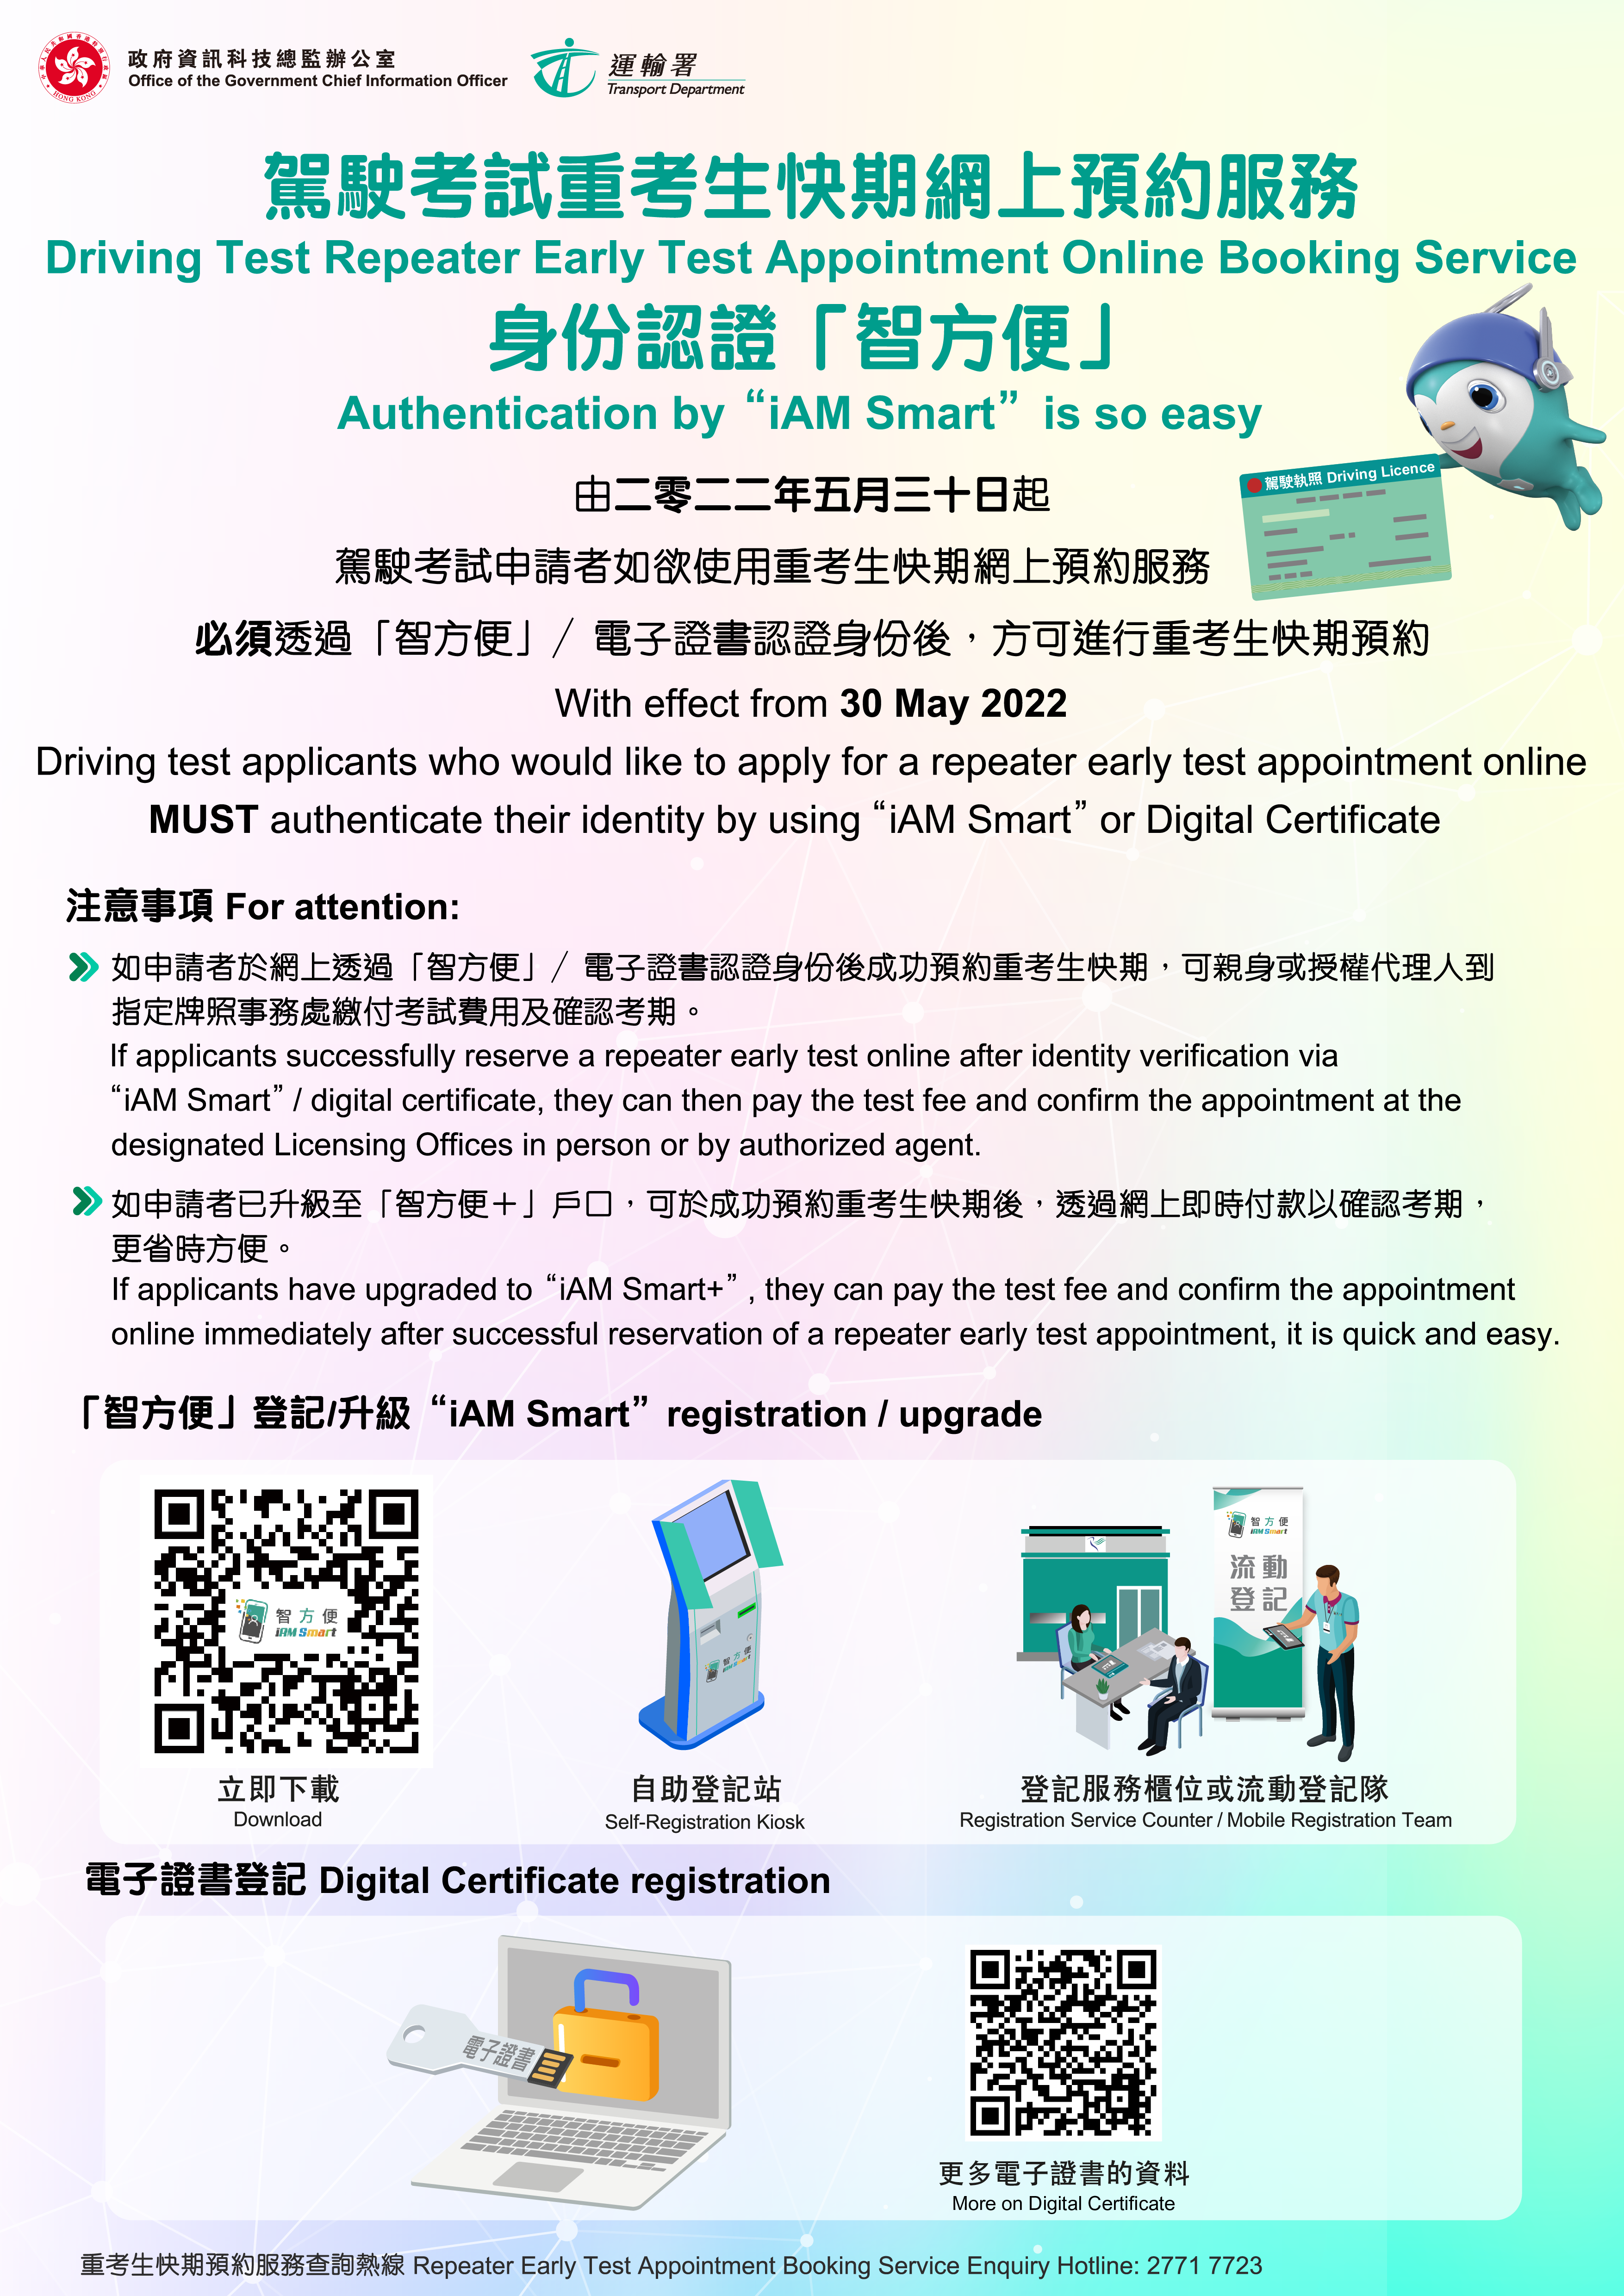 Poster of Identity Authentication by "iAM Smart" for Repeater Early Test Appointment Online Booking Service